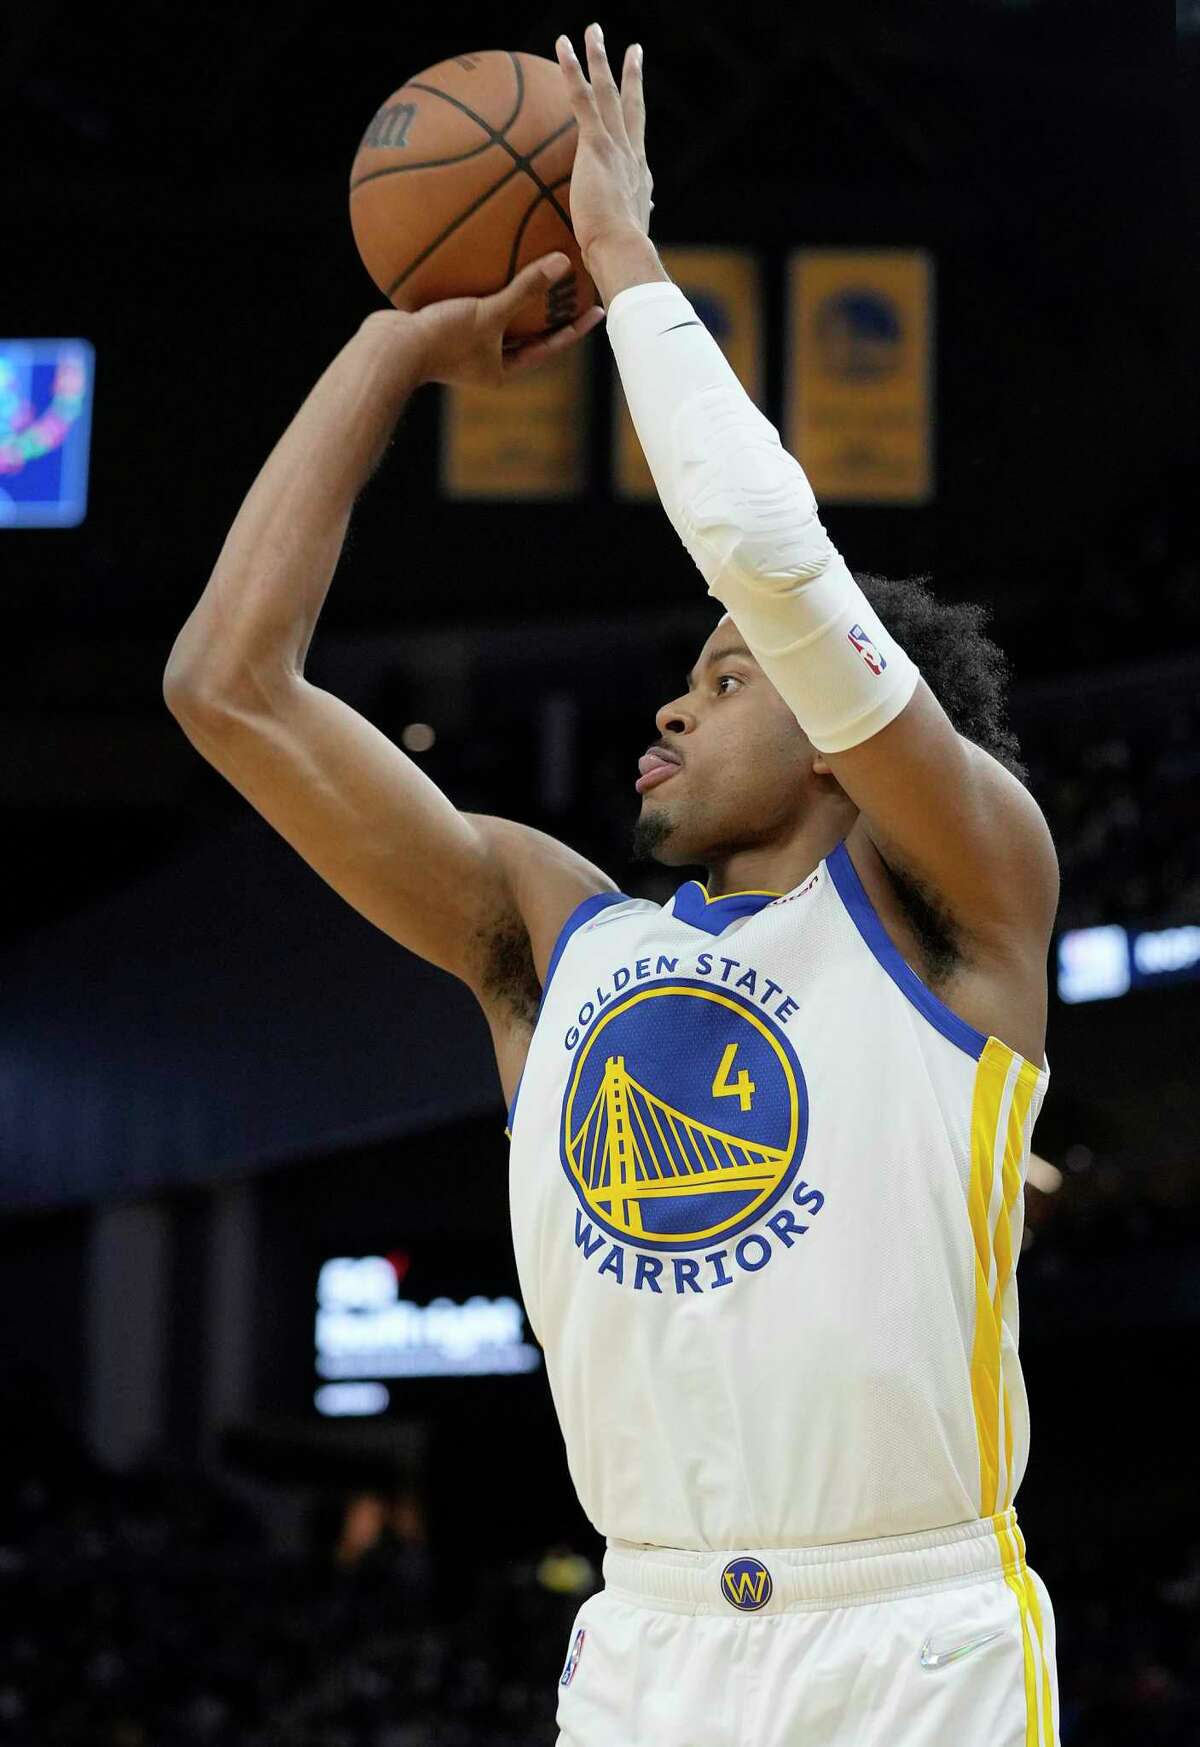 SAN FRANCISCO, CALIFORNIA - OCTOBER 08: Moses Moody #4 of the Golden State Warriors shoots a three-point shot against the Los Angeles Lakers at Chase Center on October 08, 2021 in San Francisco, California. NOTE TO USER: User expressly acknowledges and agrees that, by downloading and/or using this photograph, User is consenting to the terms and conditions of the Getty Images License Agreement. (Photo by Thearon W. Henderson/Getty Images)